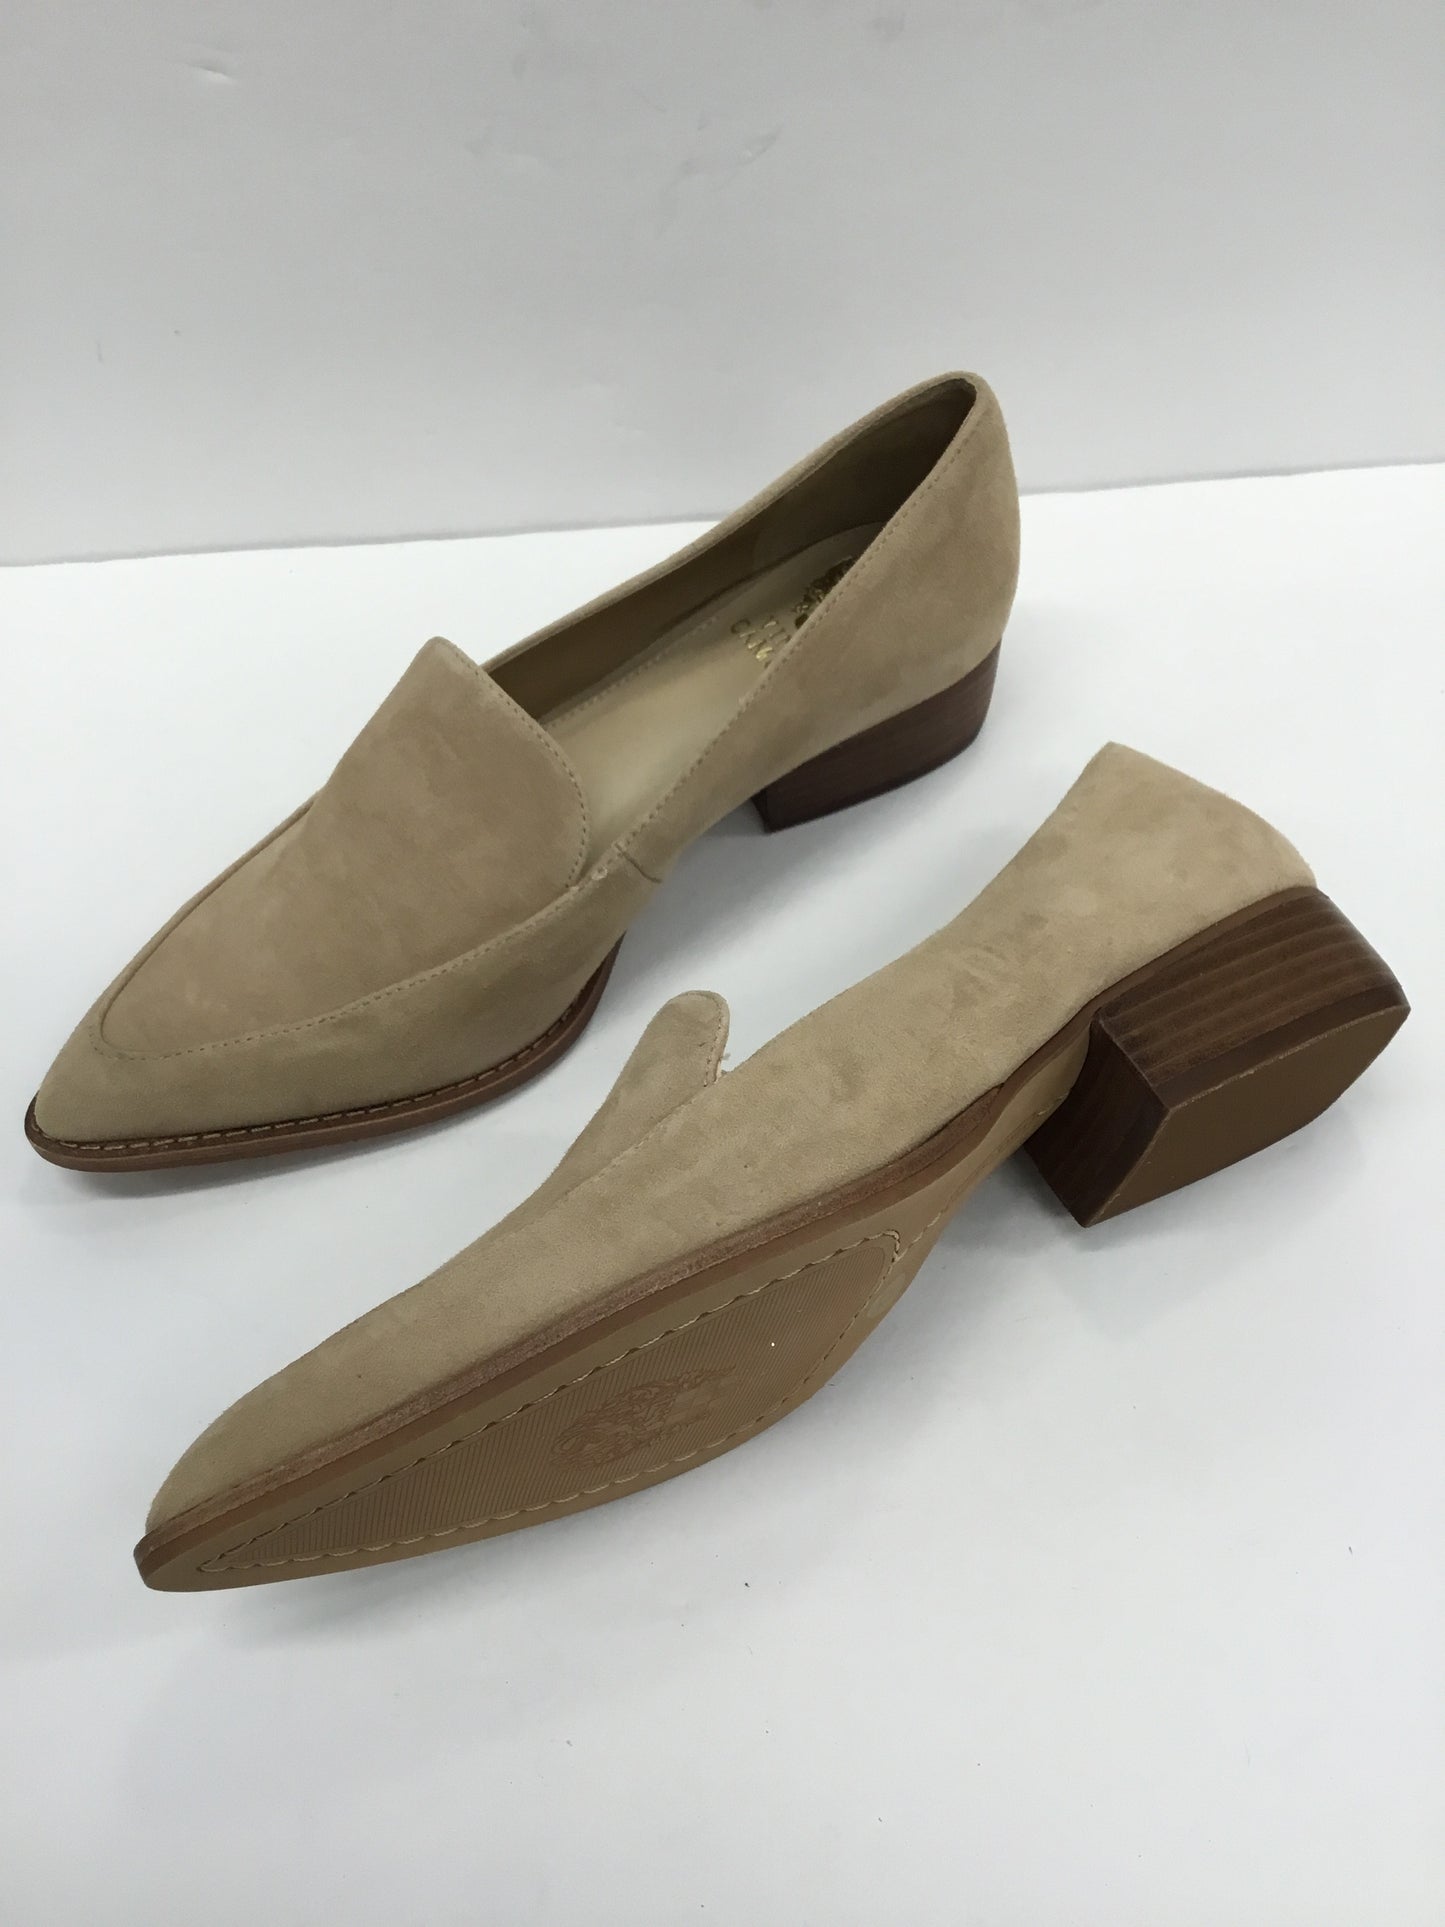 Shoes Flats Espadrille By Vince Camuto  Size: 8.5